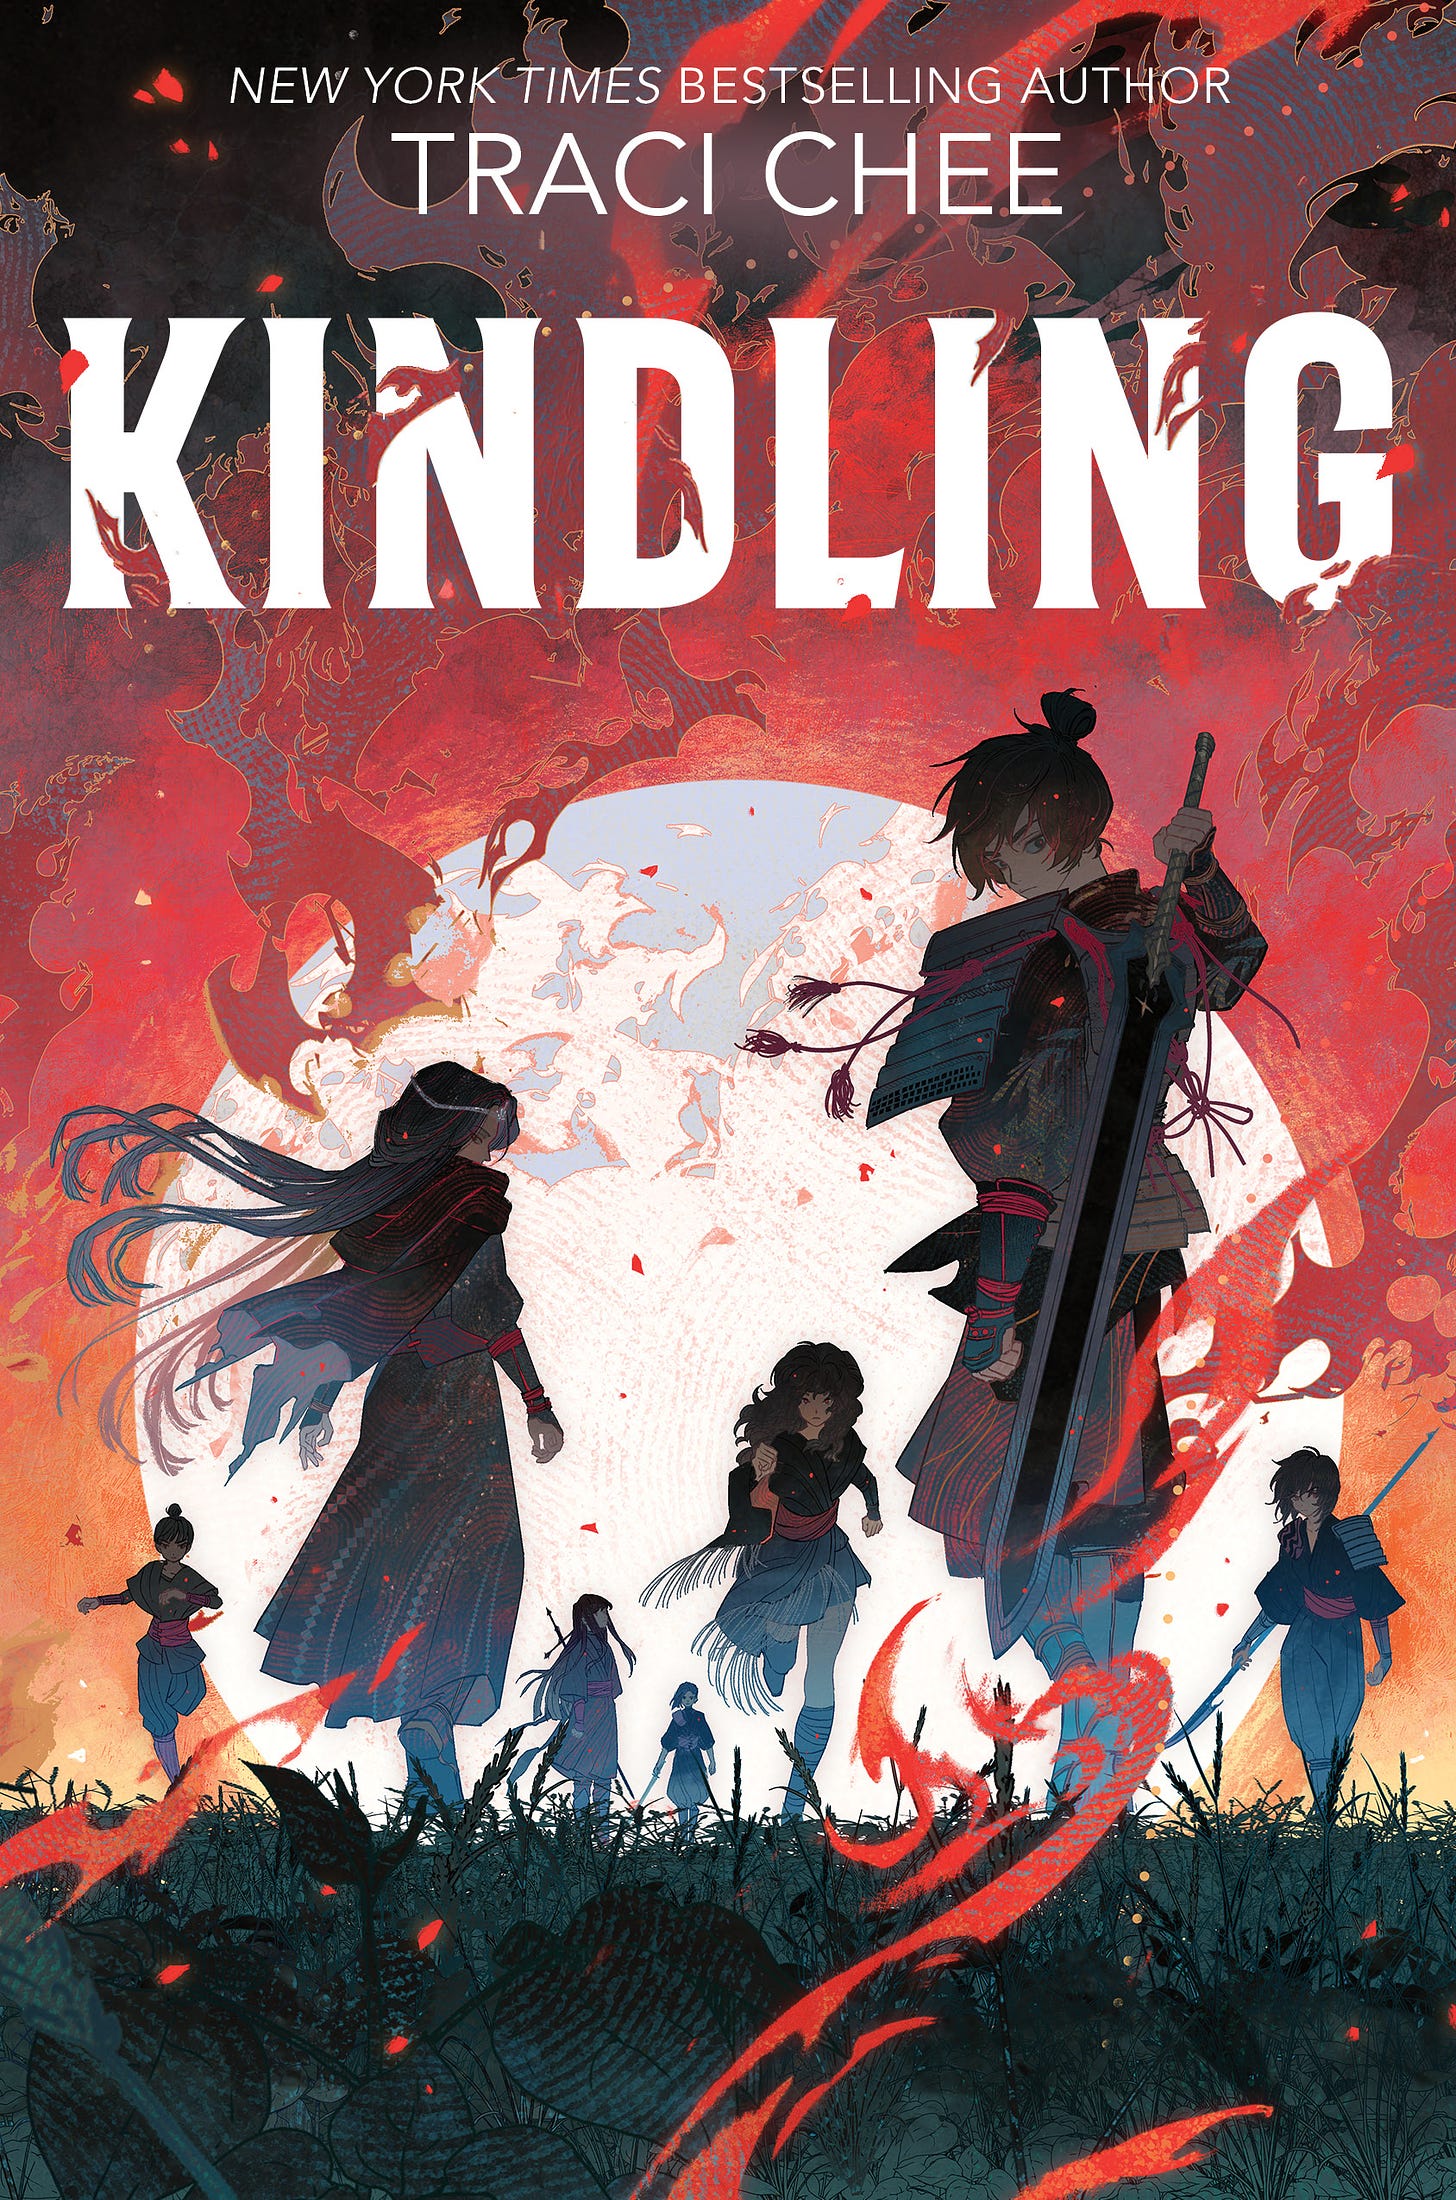 Cover of Kindling by New York Times bestselling author Traci Chee: seven warriors backlit by a giant rising moon with flames and fire dancing around them